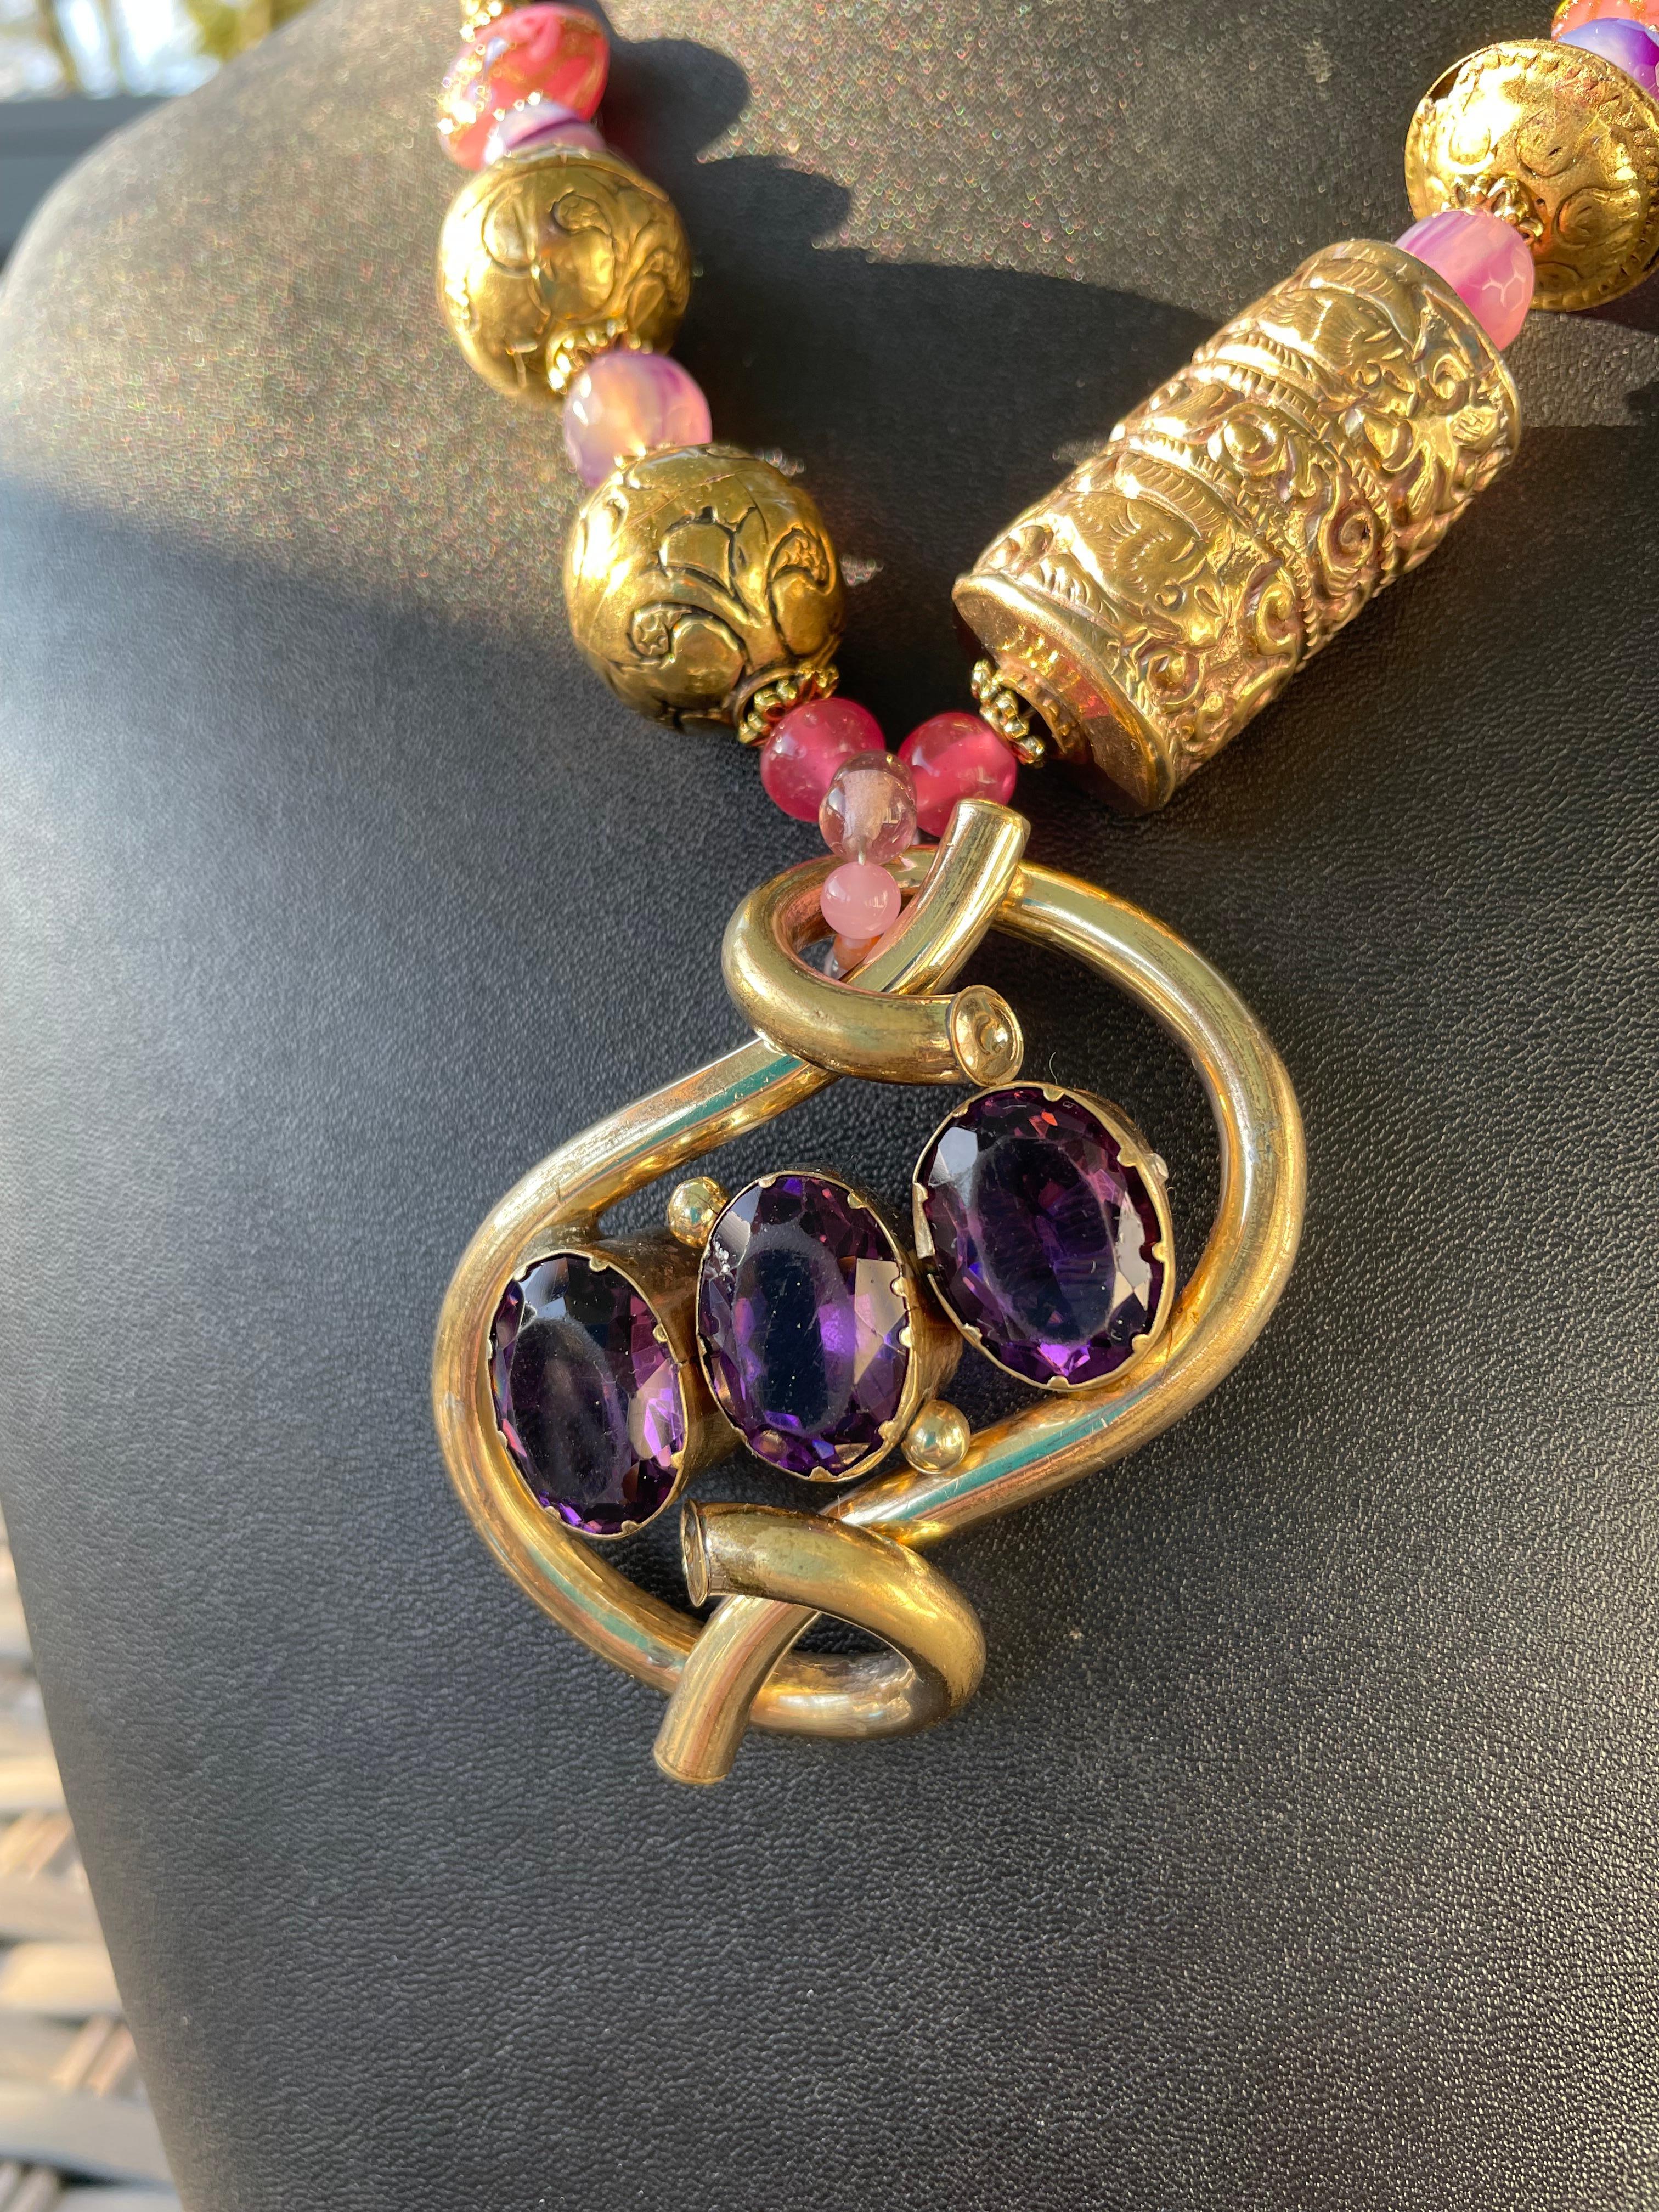 Lorraine’s Bijoux offers a highly unusual 19th century English, goldfilled and Amethyst brooch pendant necklace. This is a wonderful example of Mid Victorian jewelry being repurposed for today’s use. The addition of Tibetan brass beads, agates,